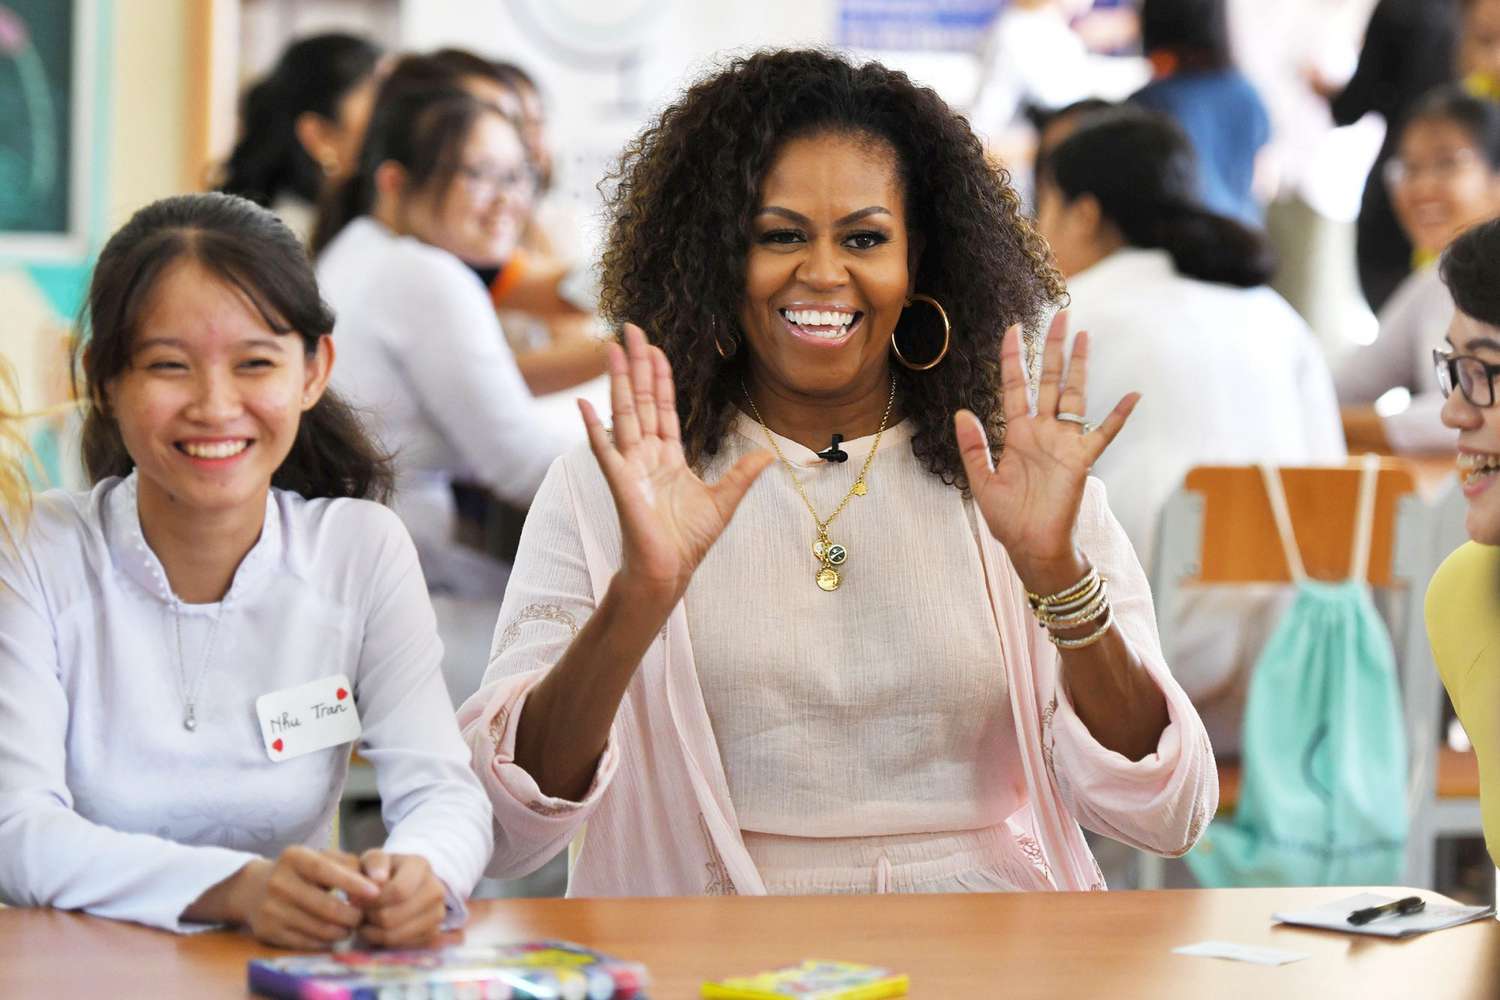 Former US first lady Michelle Obama (C) smiles as she meets wiith Vietnamese students in Can Giuoc district, Long An province, Vietnam 09 December 2019.